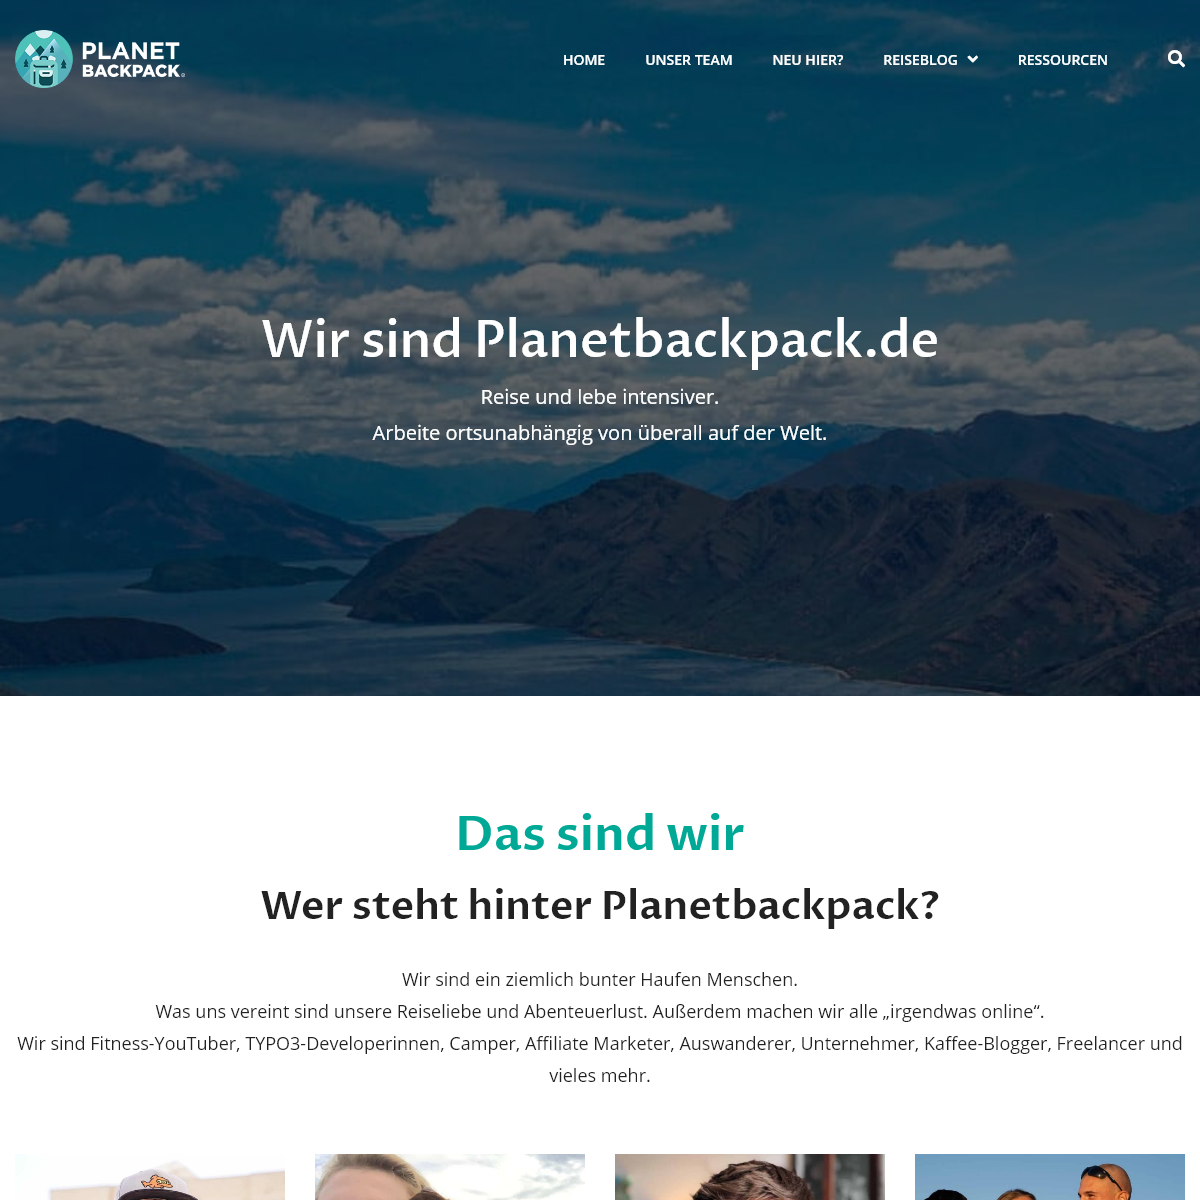 A complete backup of planetbackpack.de